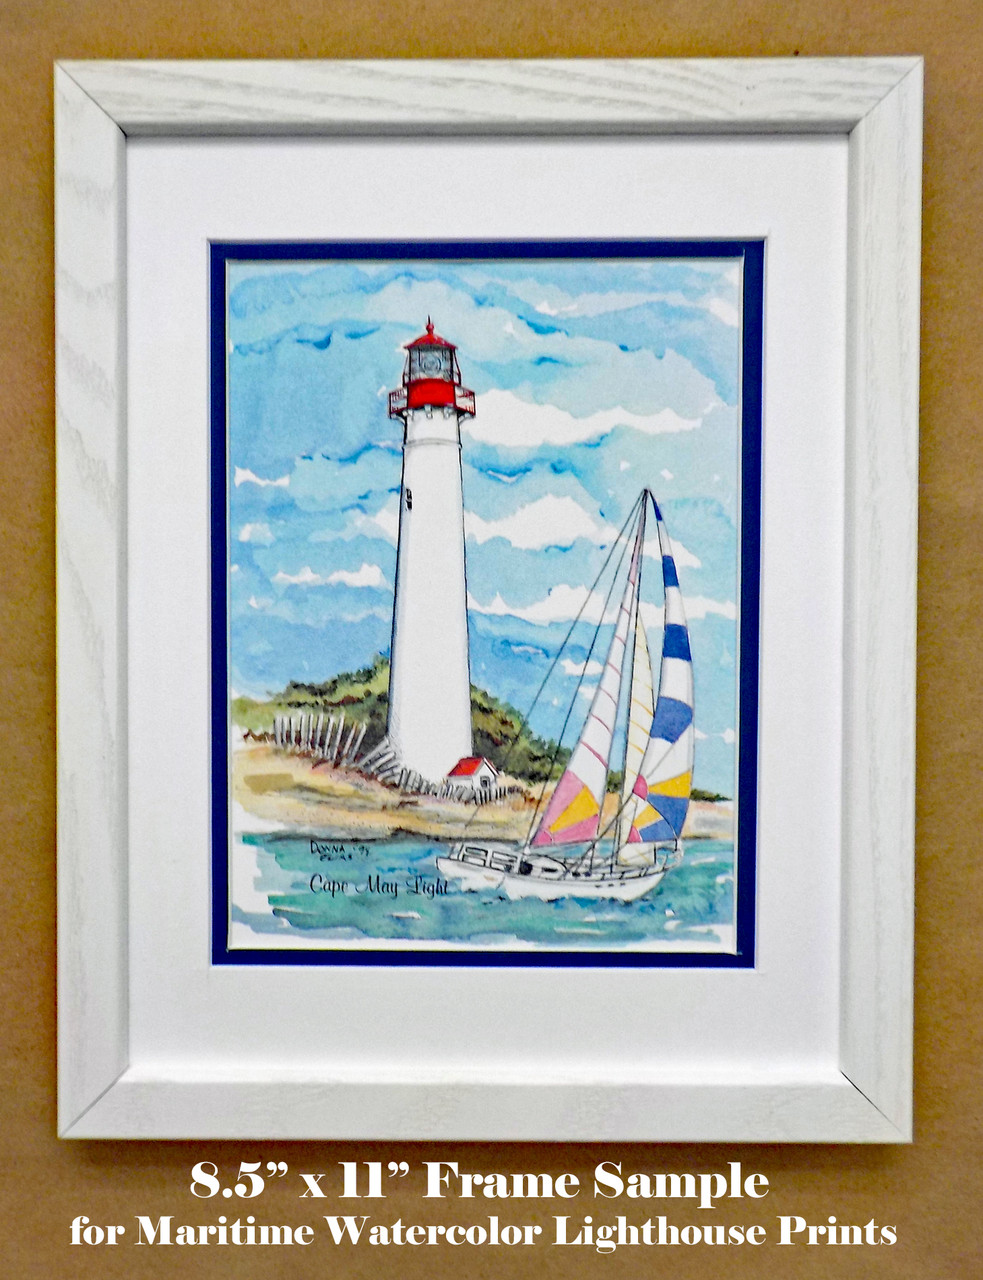 Frame & matting sample (shown with Cape May light)